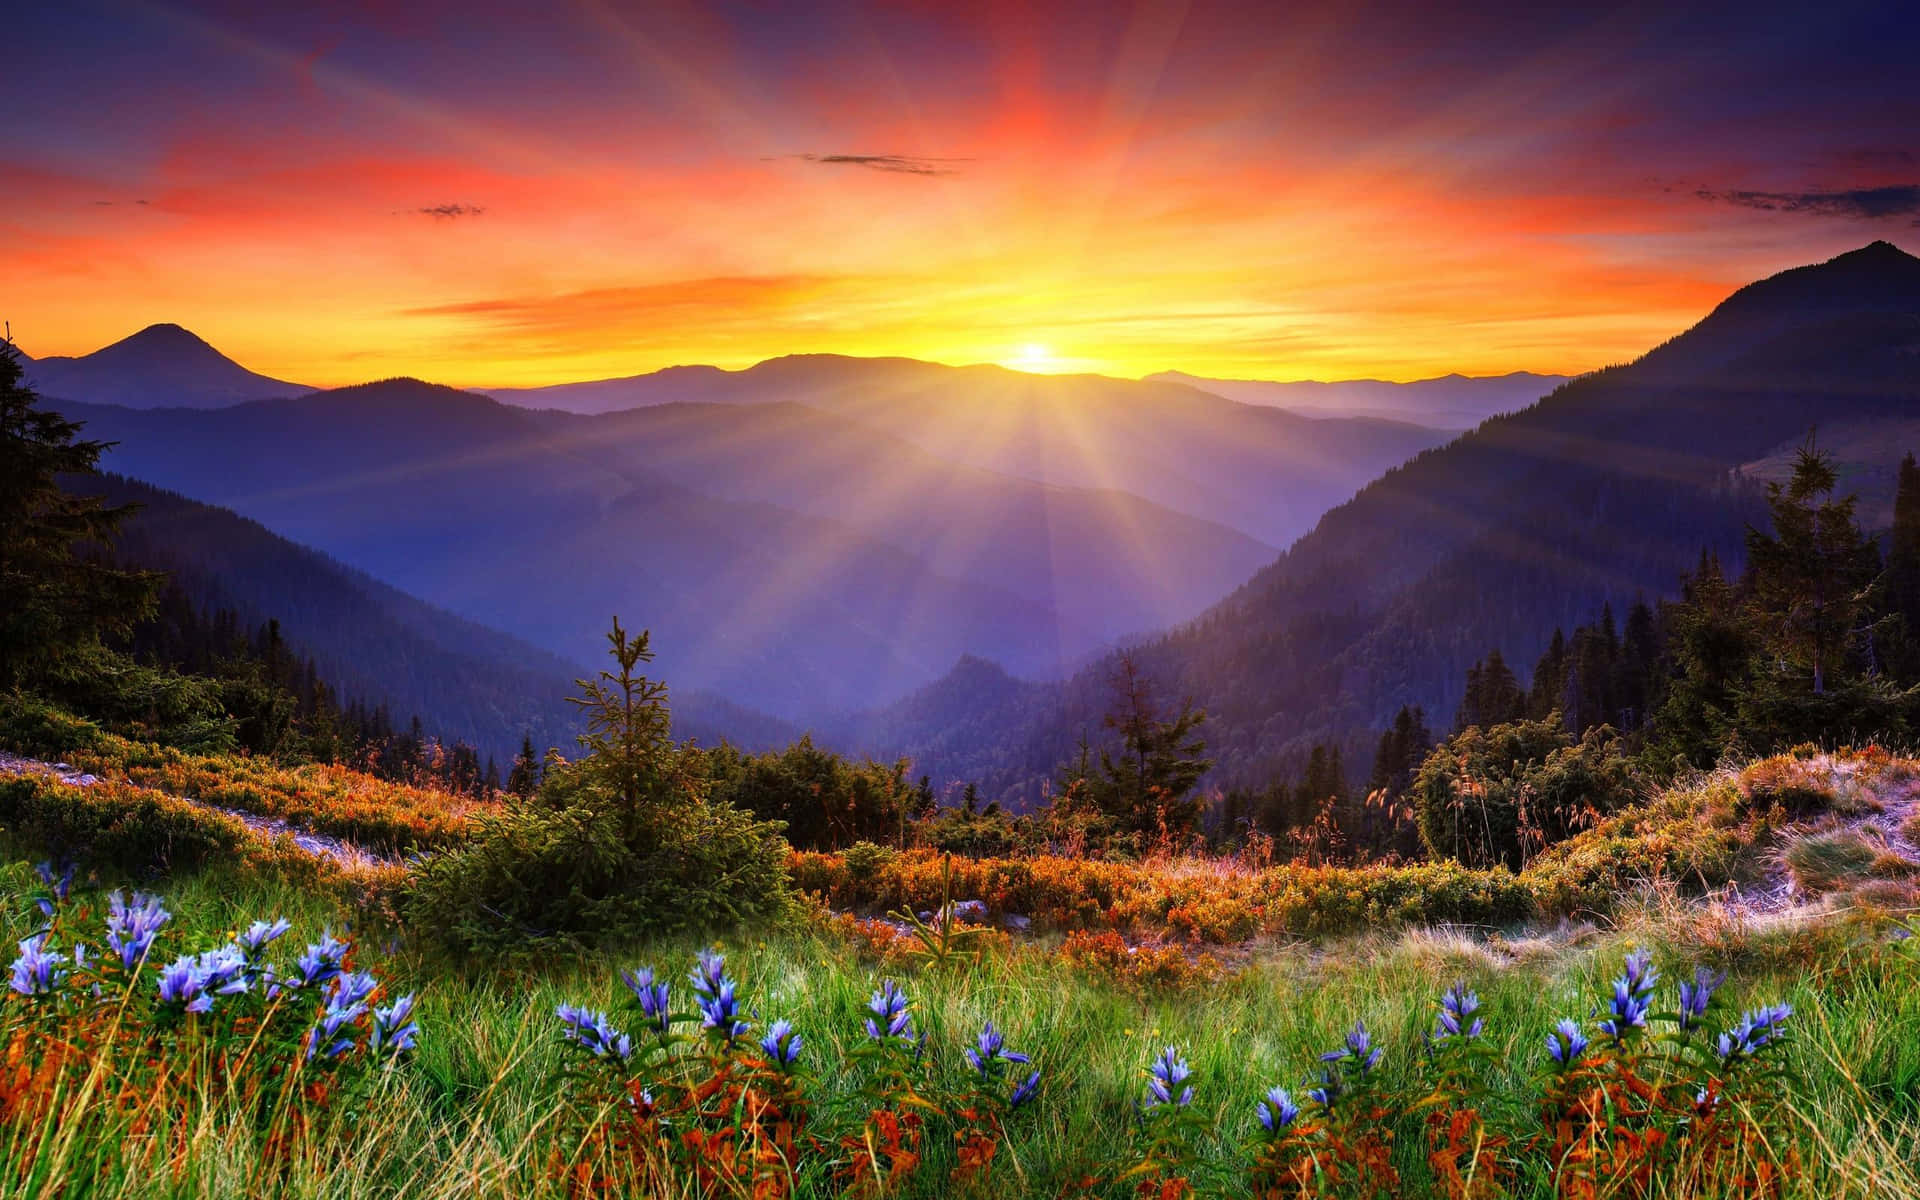 Enjoy the beauty of nature with this stunning desktop background Wallpaper